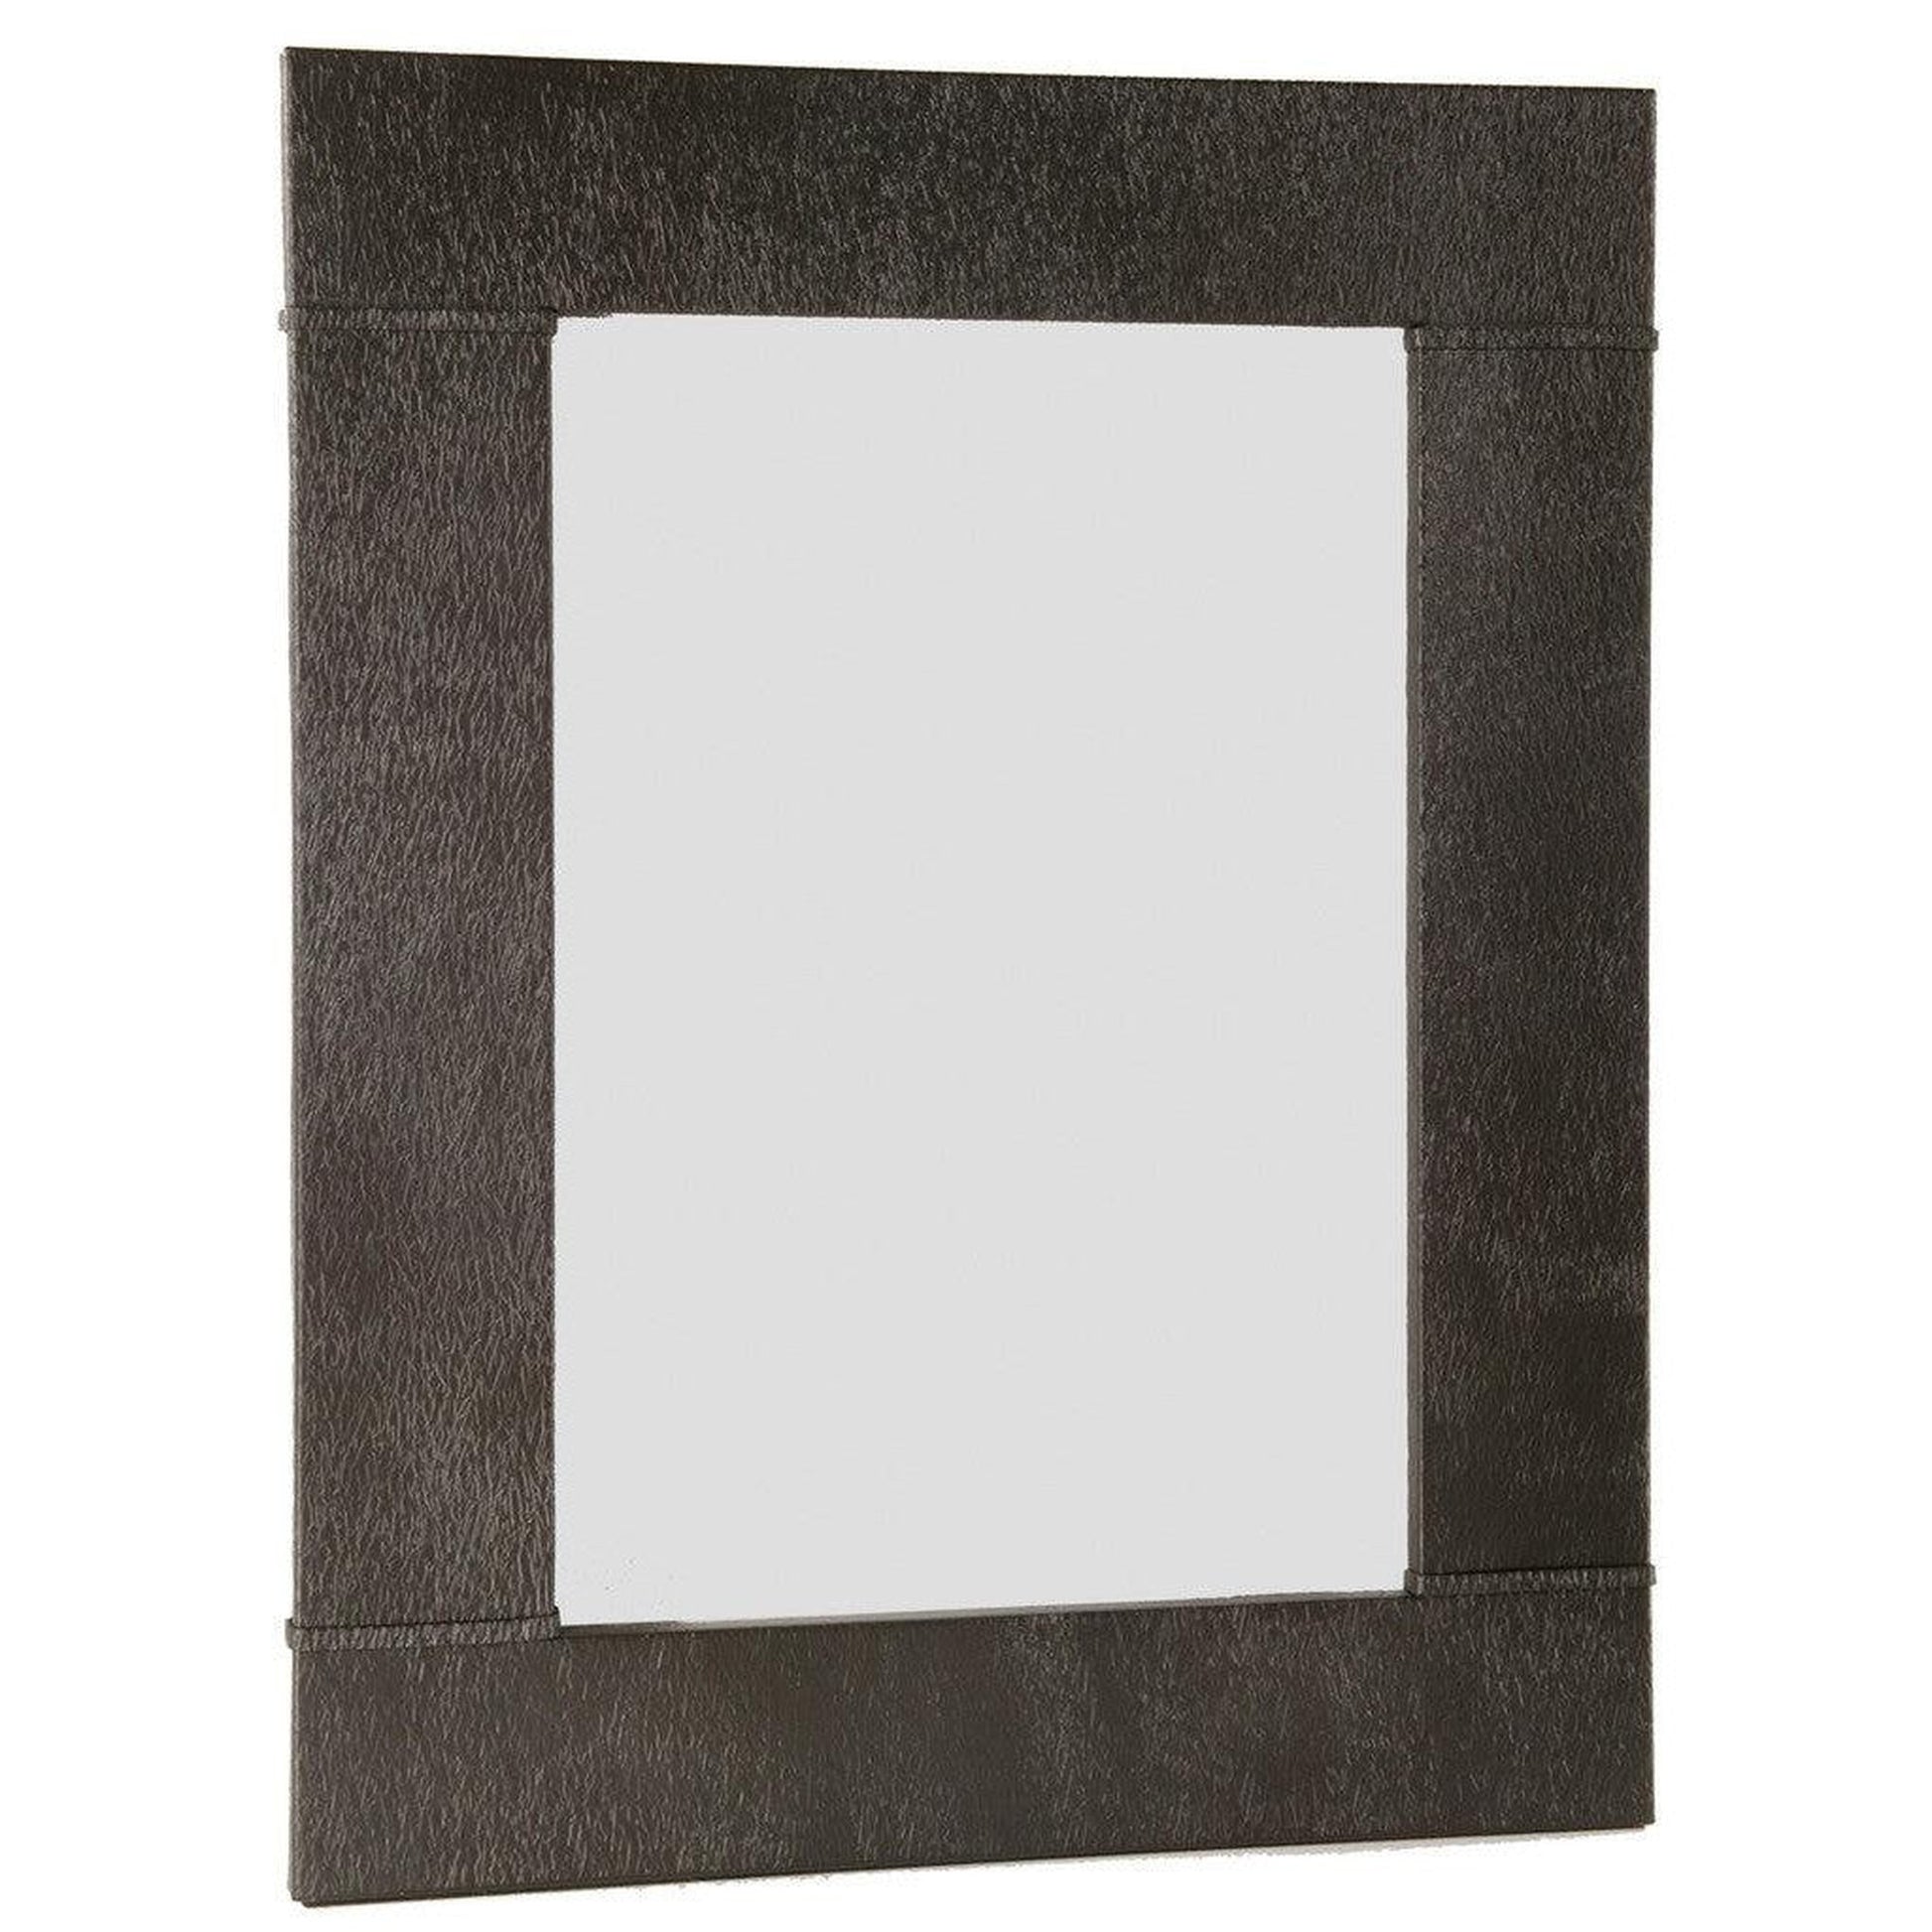 Stone County Ironworks Cedarvale 31" x 35" Small Burnished Gold Iron Wall Mirror With Pewter Iron Accent